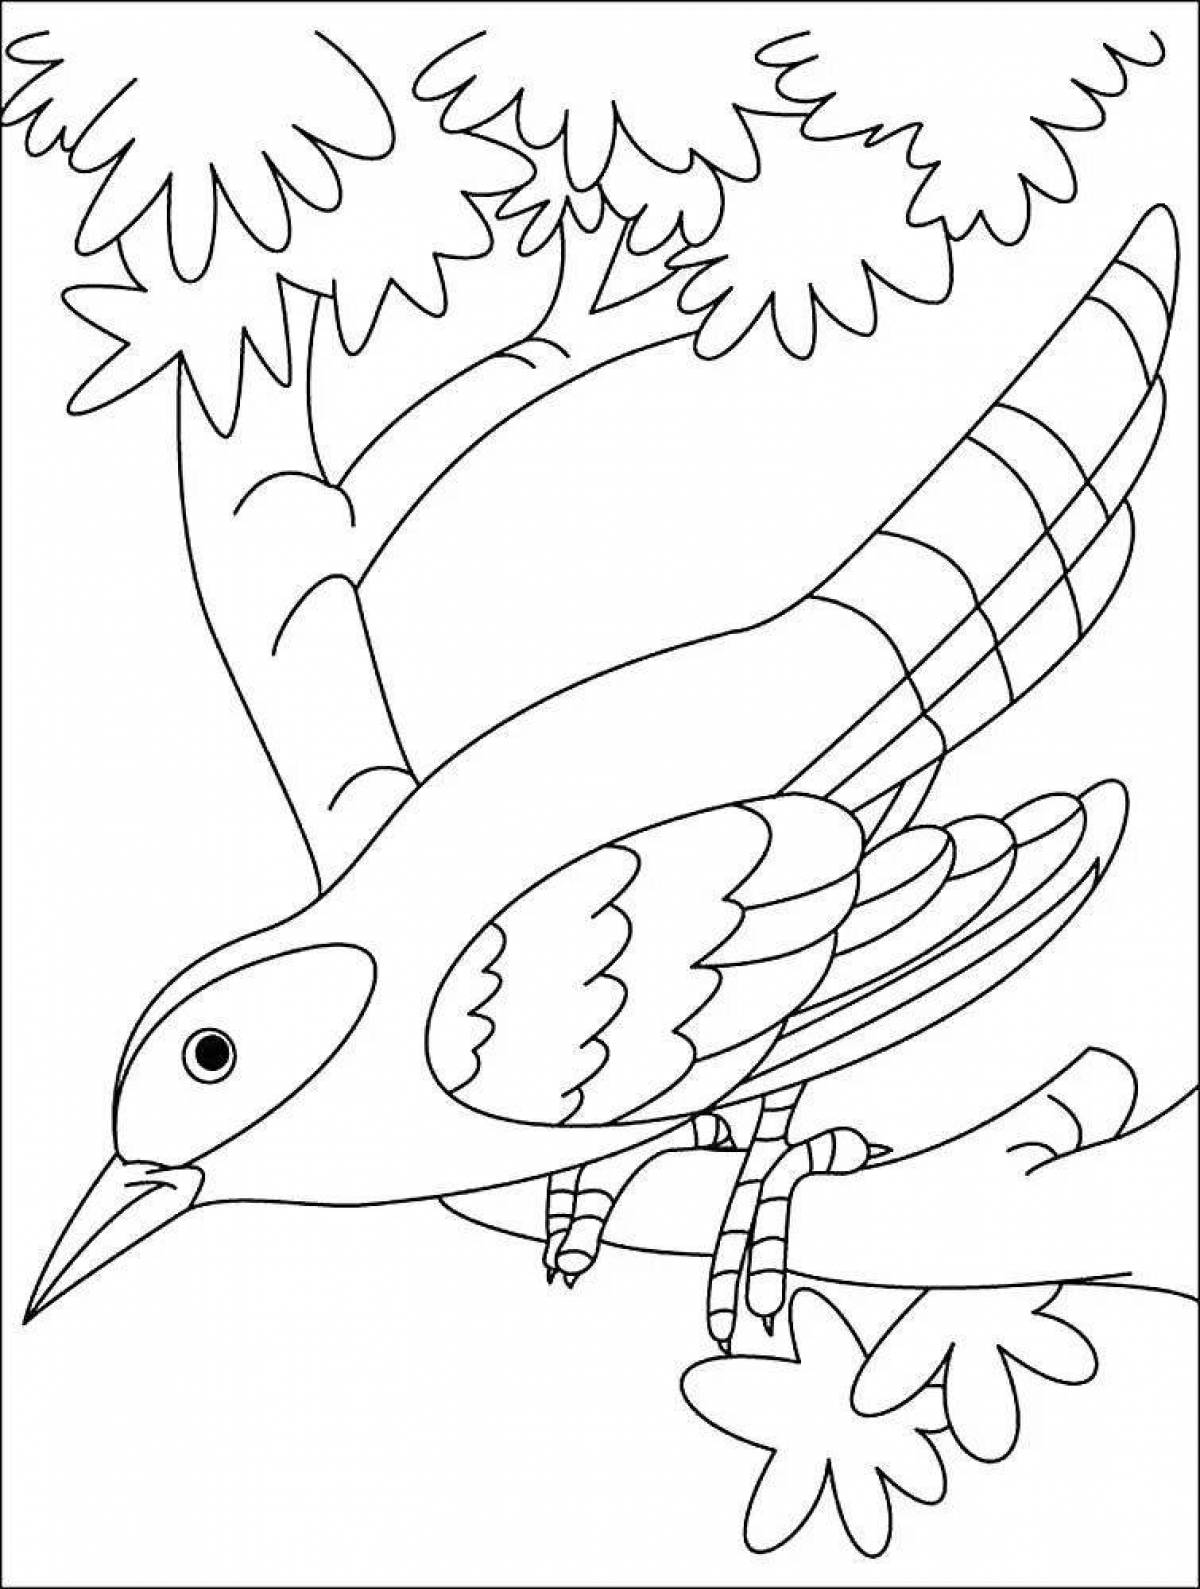 A lovely cuckoo coloring book for beginners